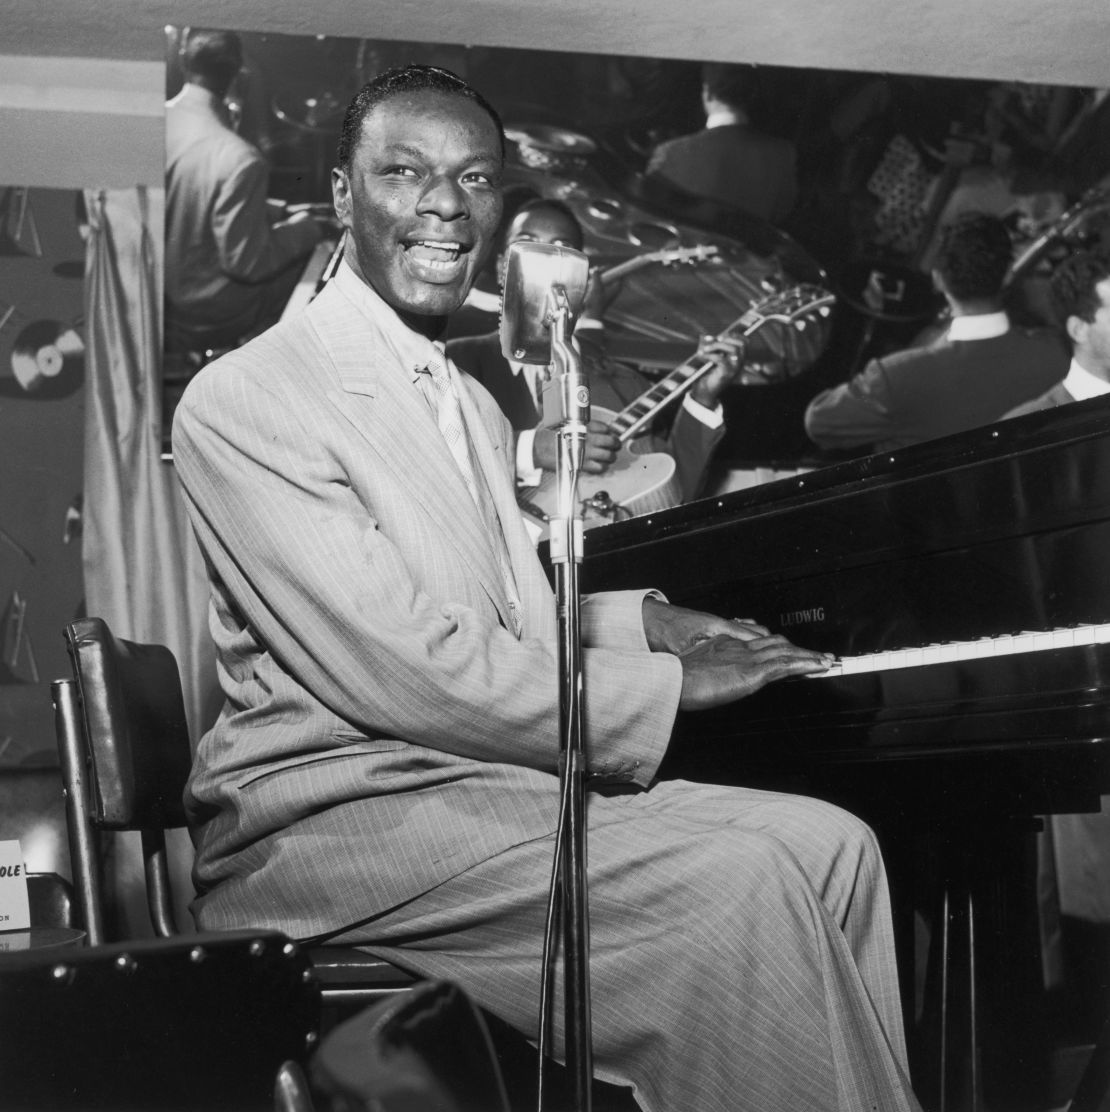 By the time of this 1951 performance, Nat King Cole had put plenty of miles on "Route 66."